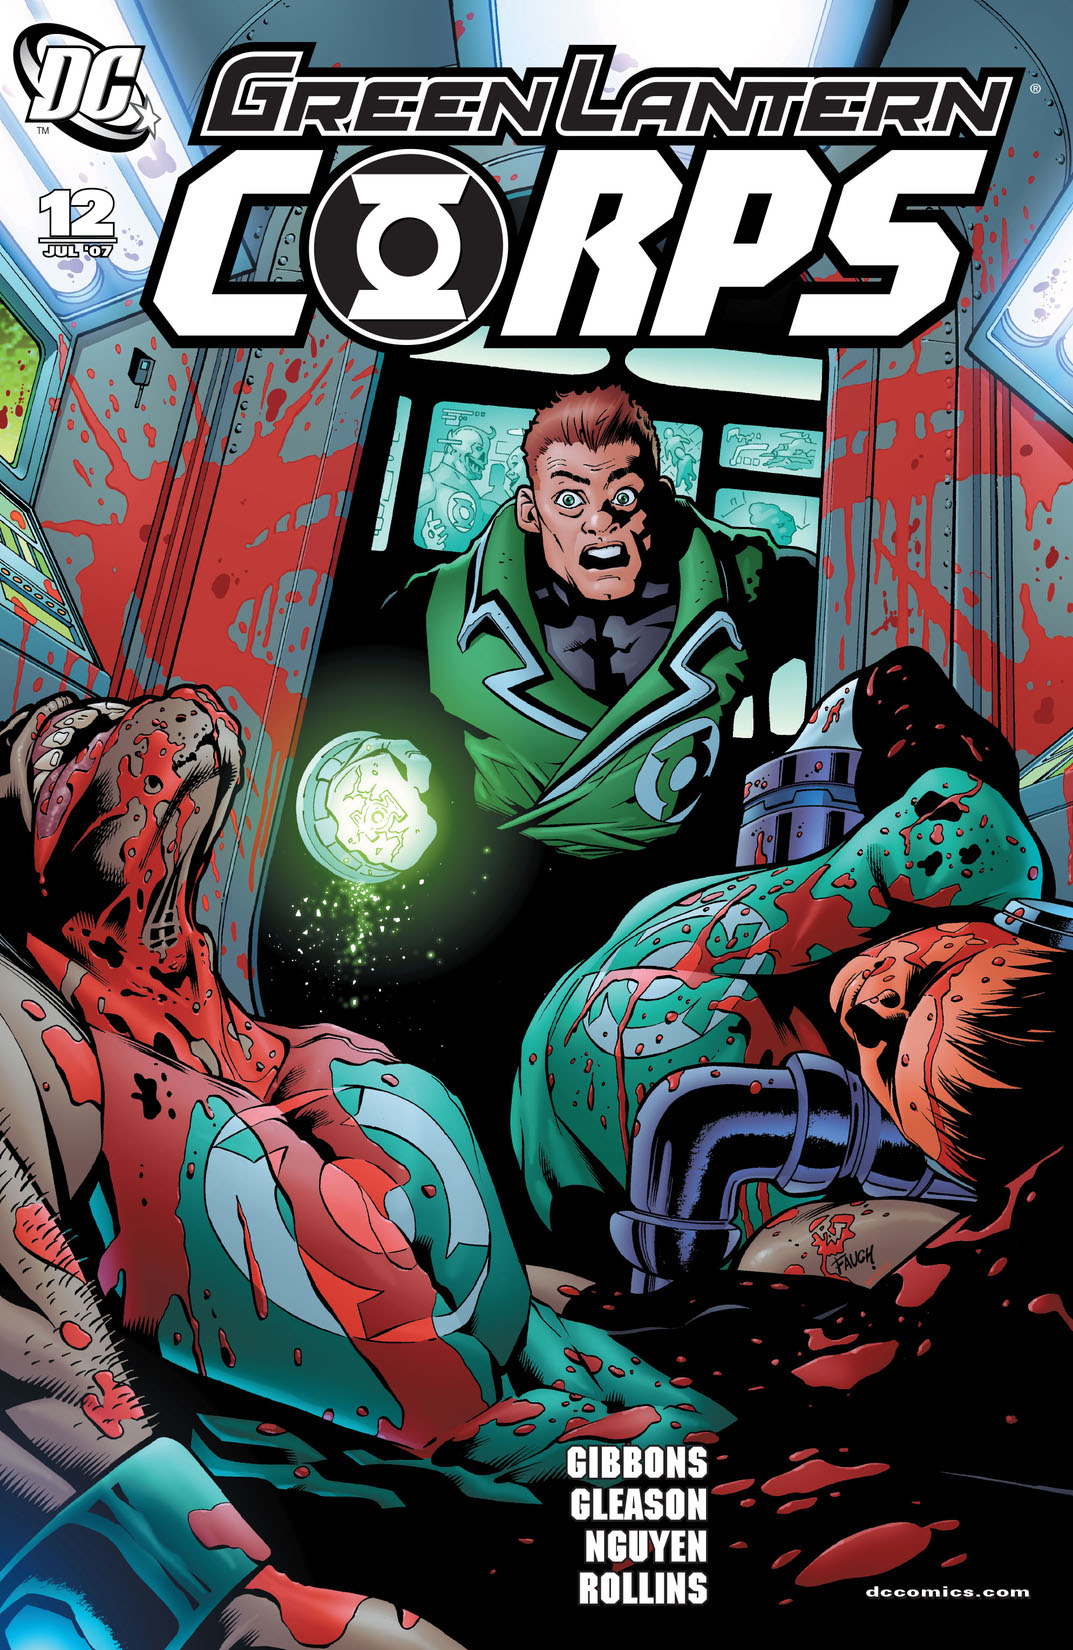 Green Lantern Corps (2006-) #12 preview images